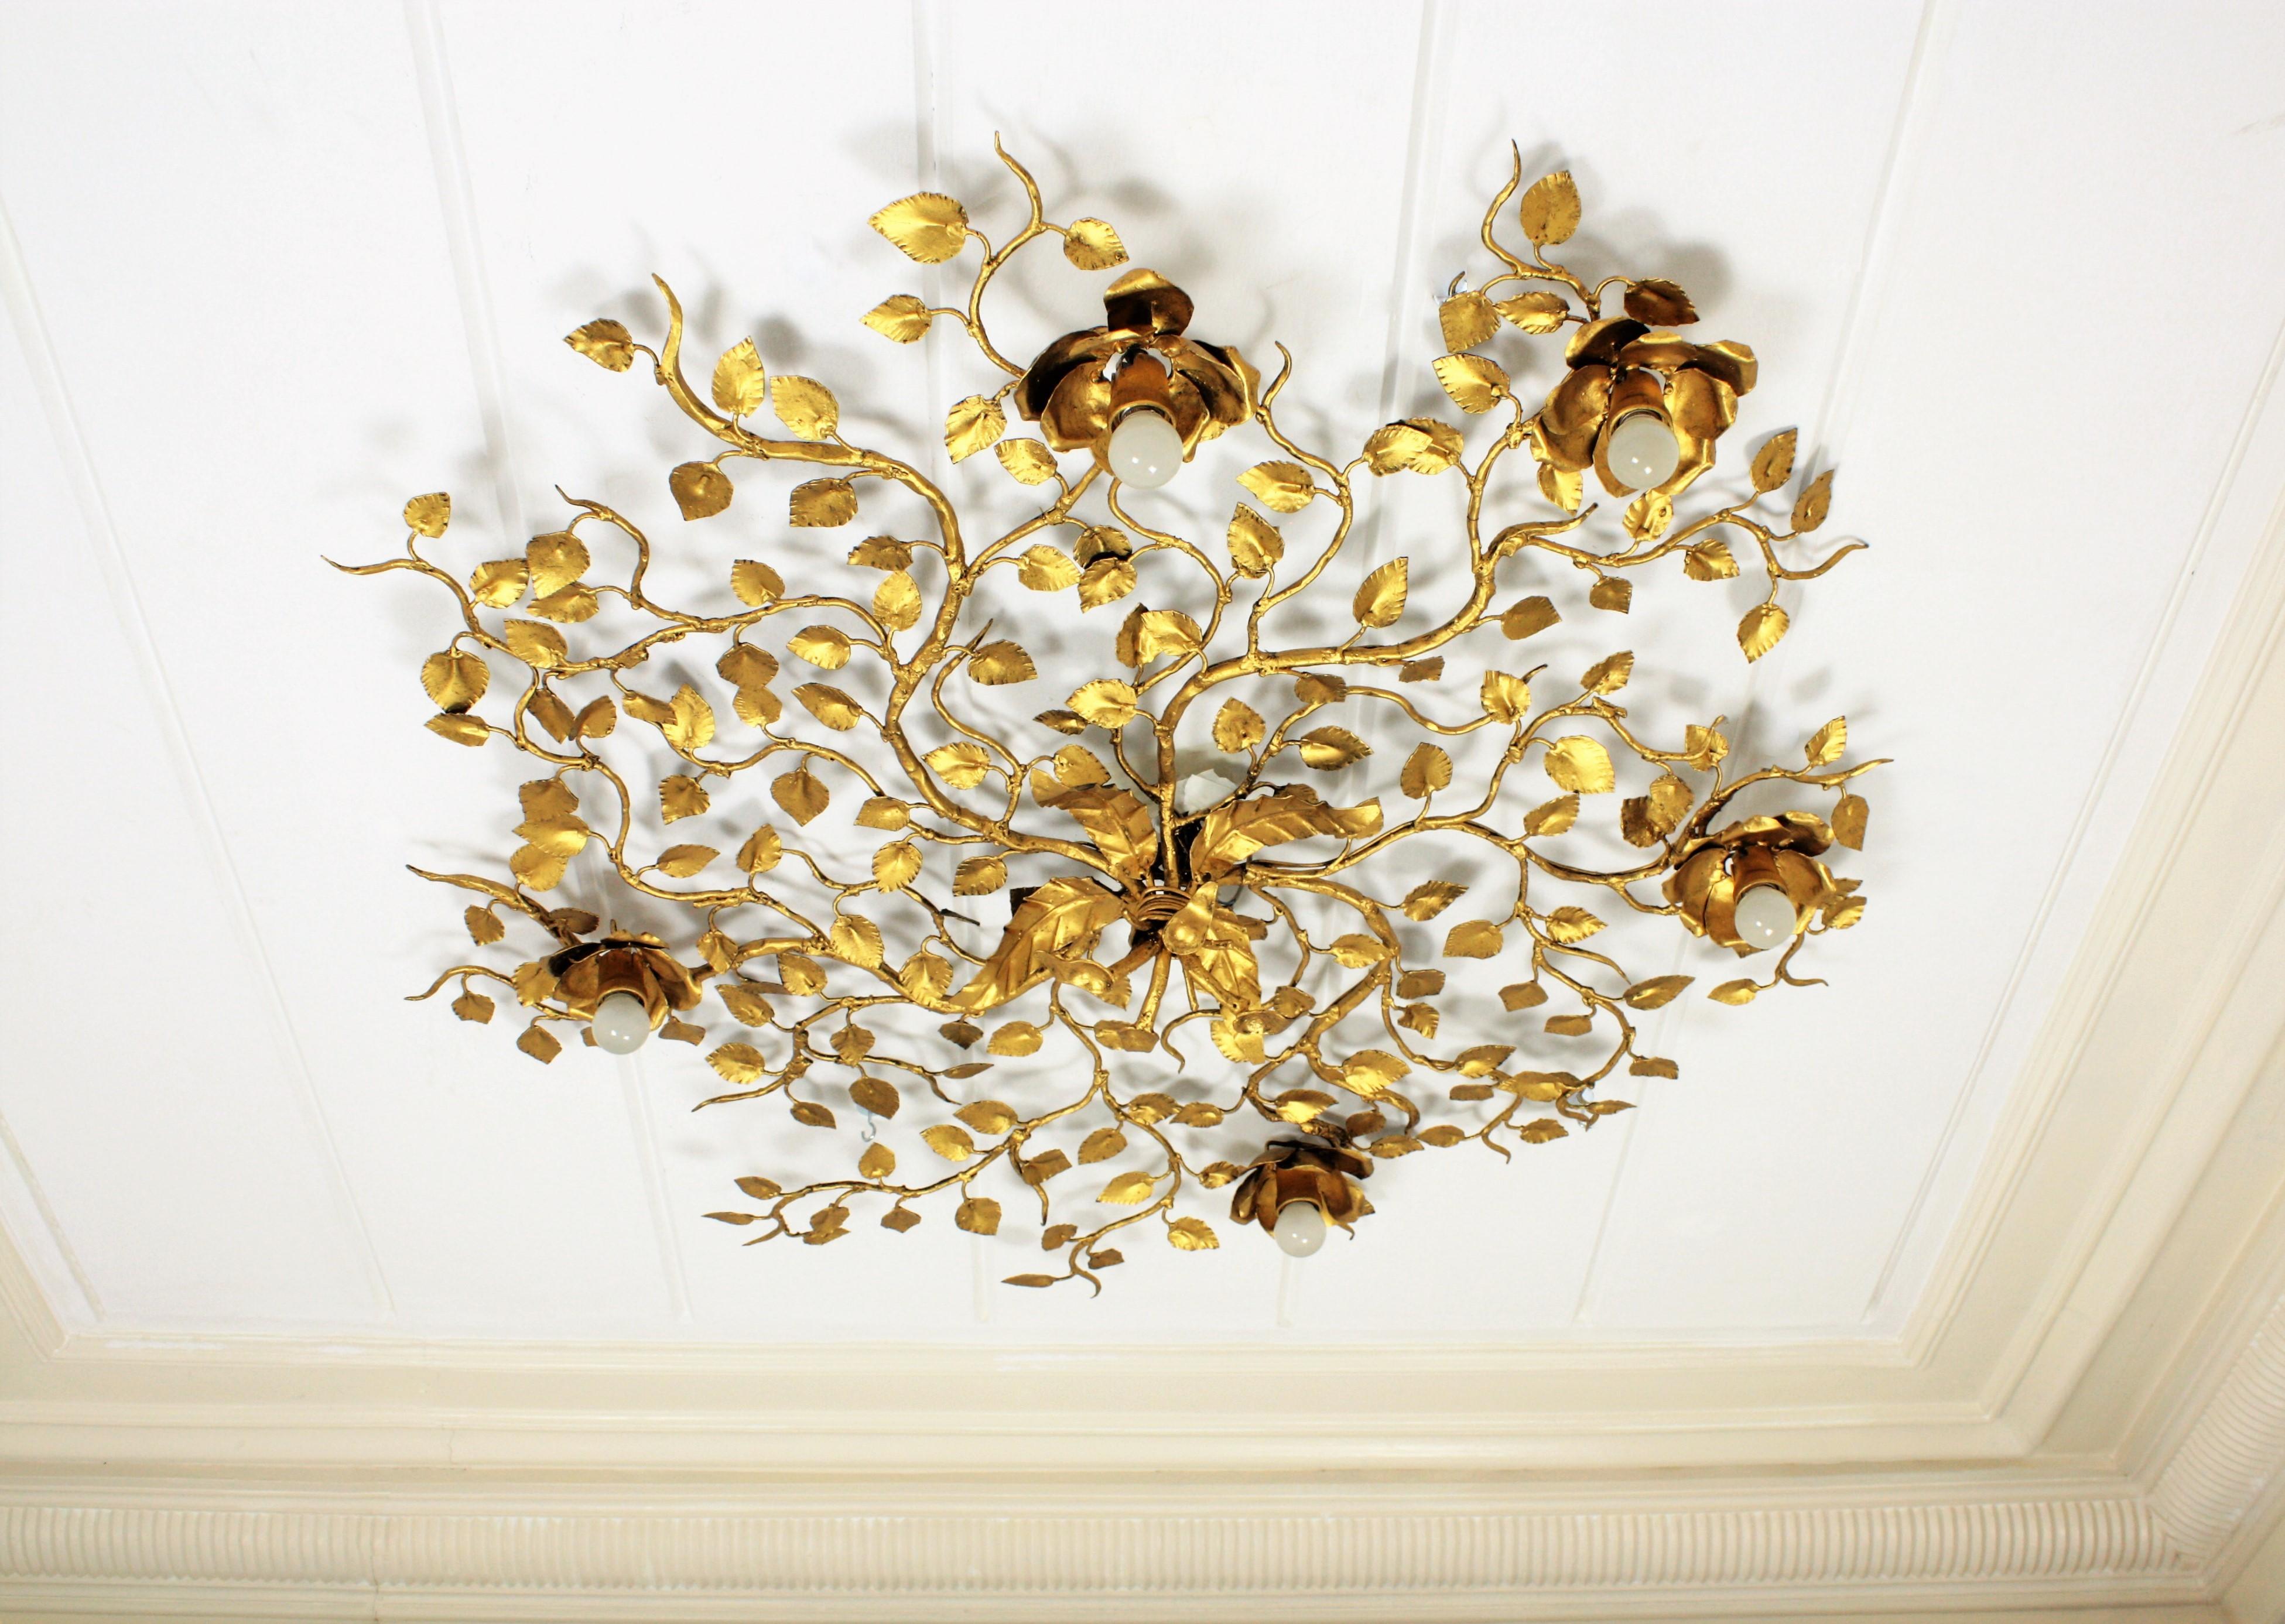 Outstanding large size hand-hammered gilt iron ornate flower bush ceiling light fixture with five flower lights. An spectacular Hollywood Regency style piece to preside a main room or a living room. This light fixture could also work as a big wall